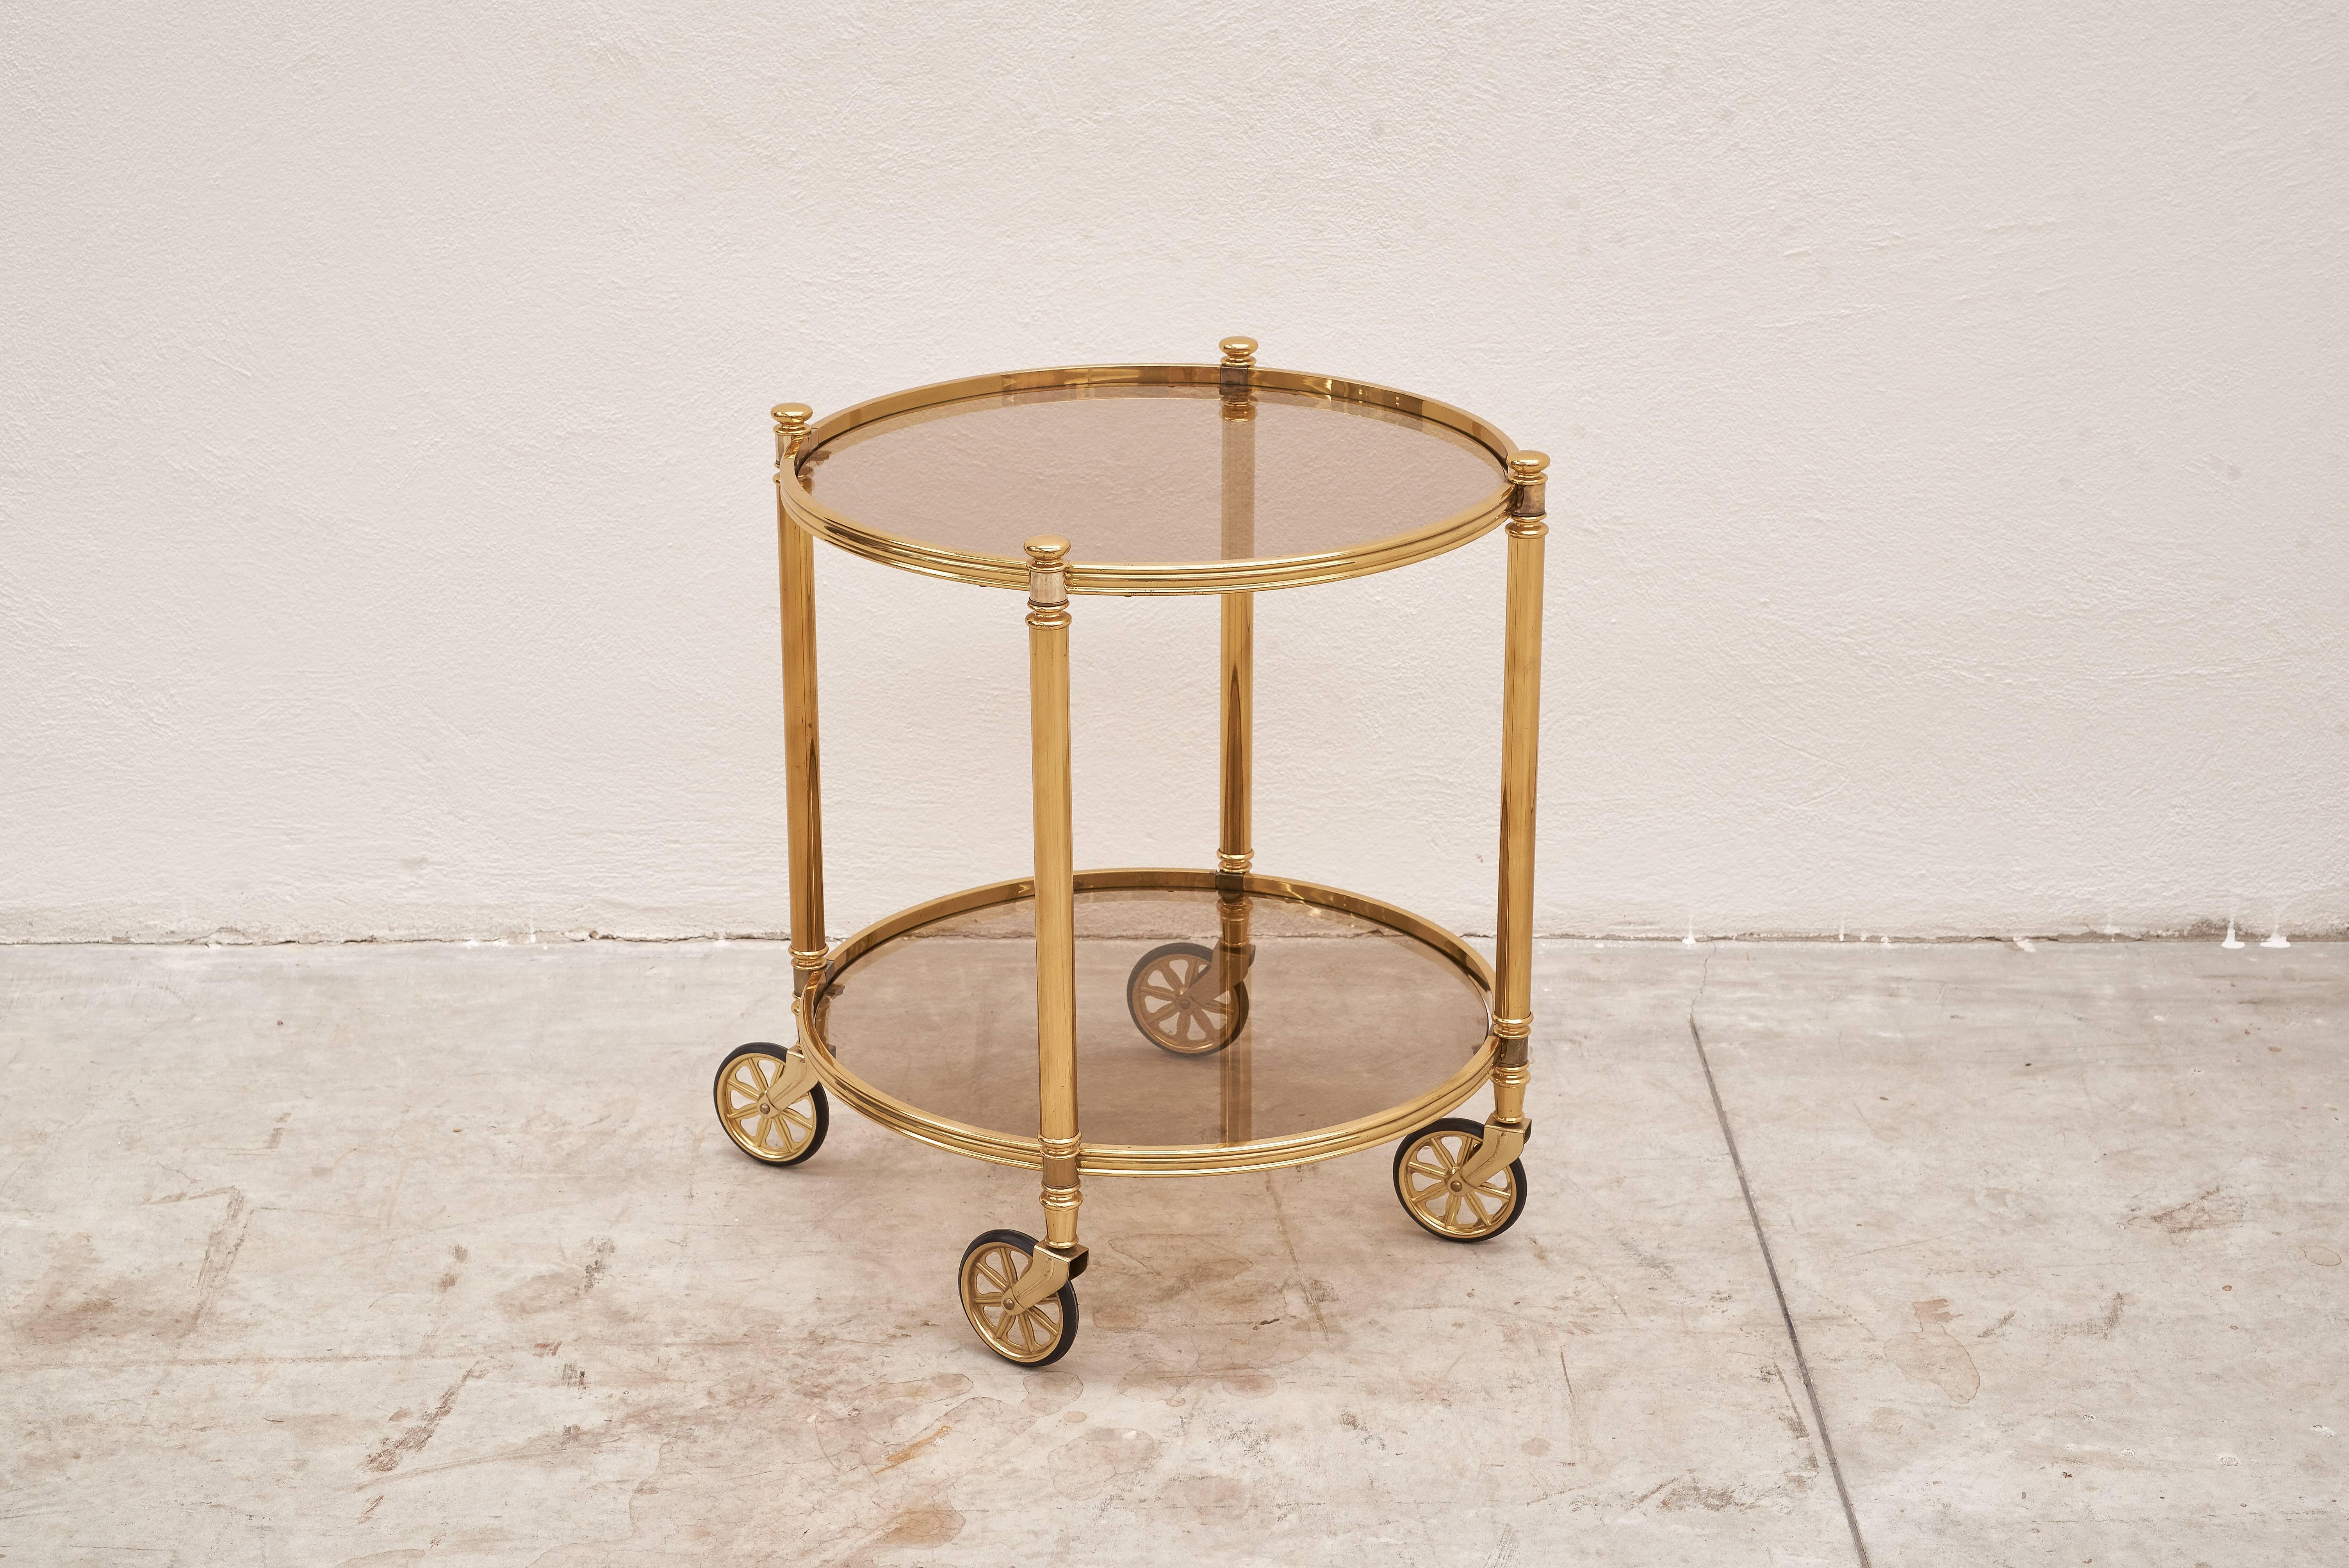 1970s Italian two-tier circular brass bar cart with smoked glasses. 

Very good condition with pleasant patina on metal part.